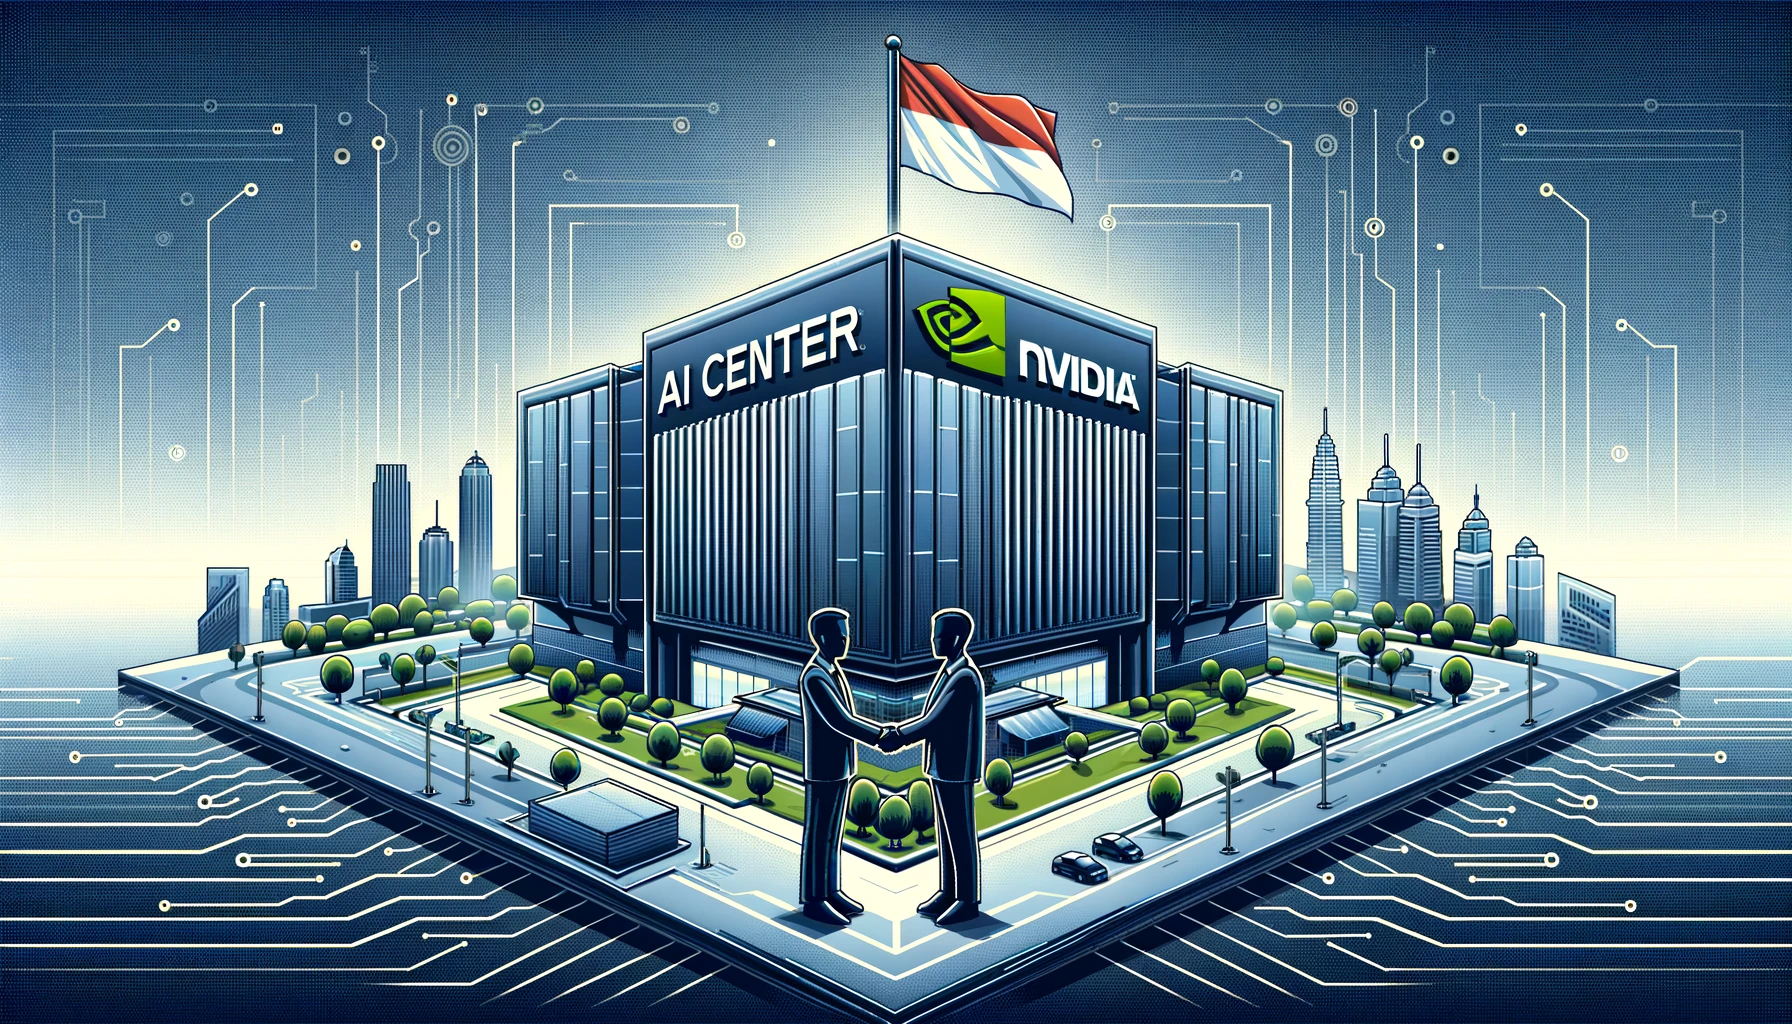 Nvidia and Indosat intend to invest $200 million in an AI center in Indonesia, according to the government.